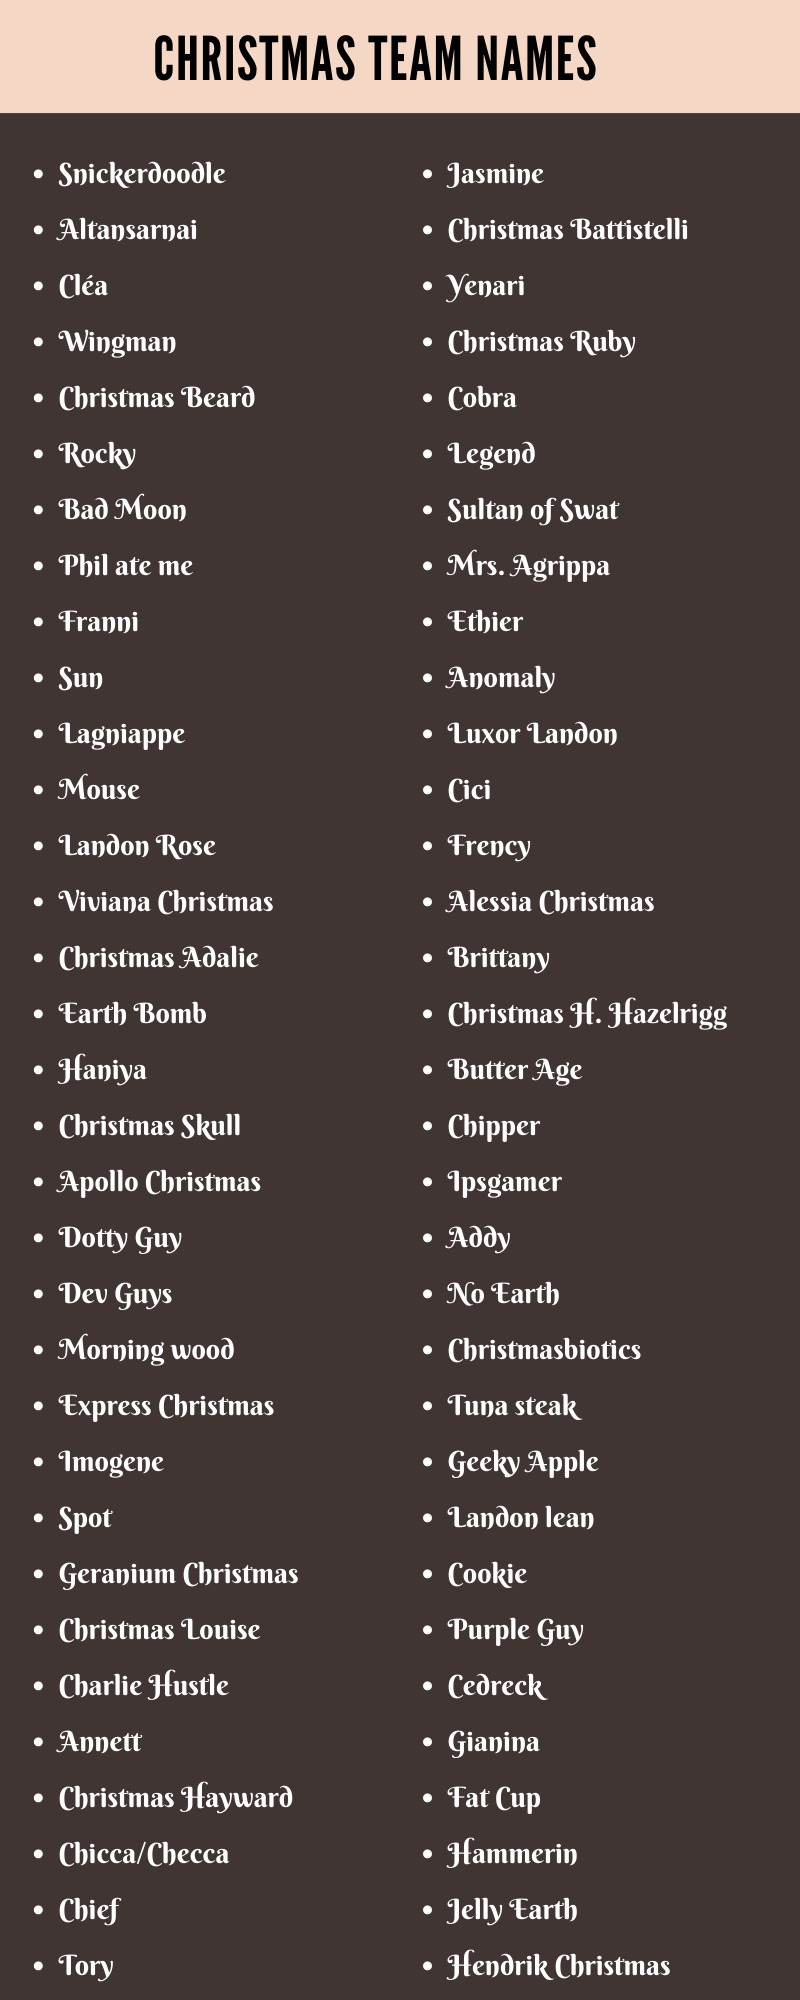 400 Cool Christmas Team Names Ideas and Suggestions